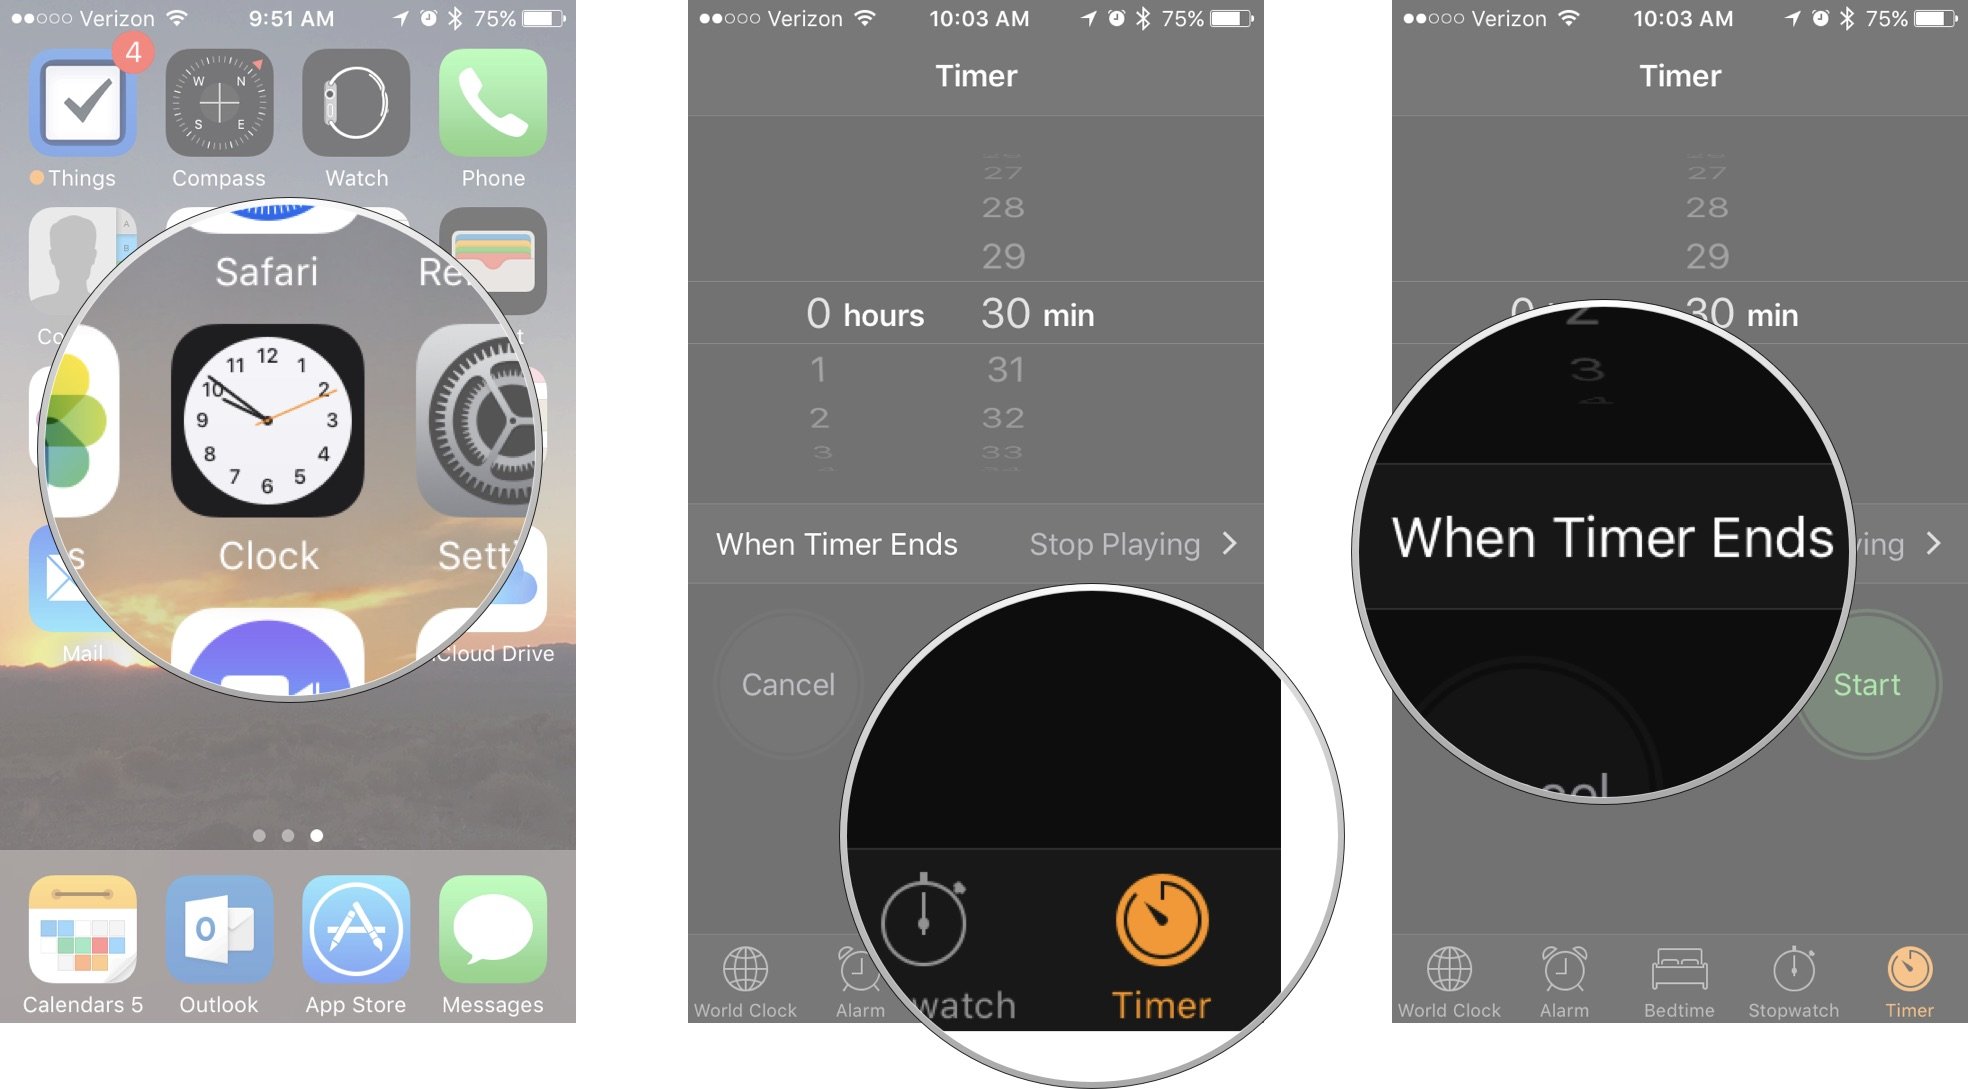 Launch the Clock app, then tap Timer, then tap When Timer Ends